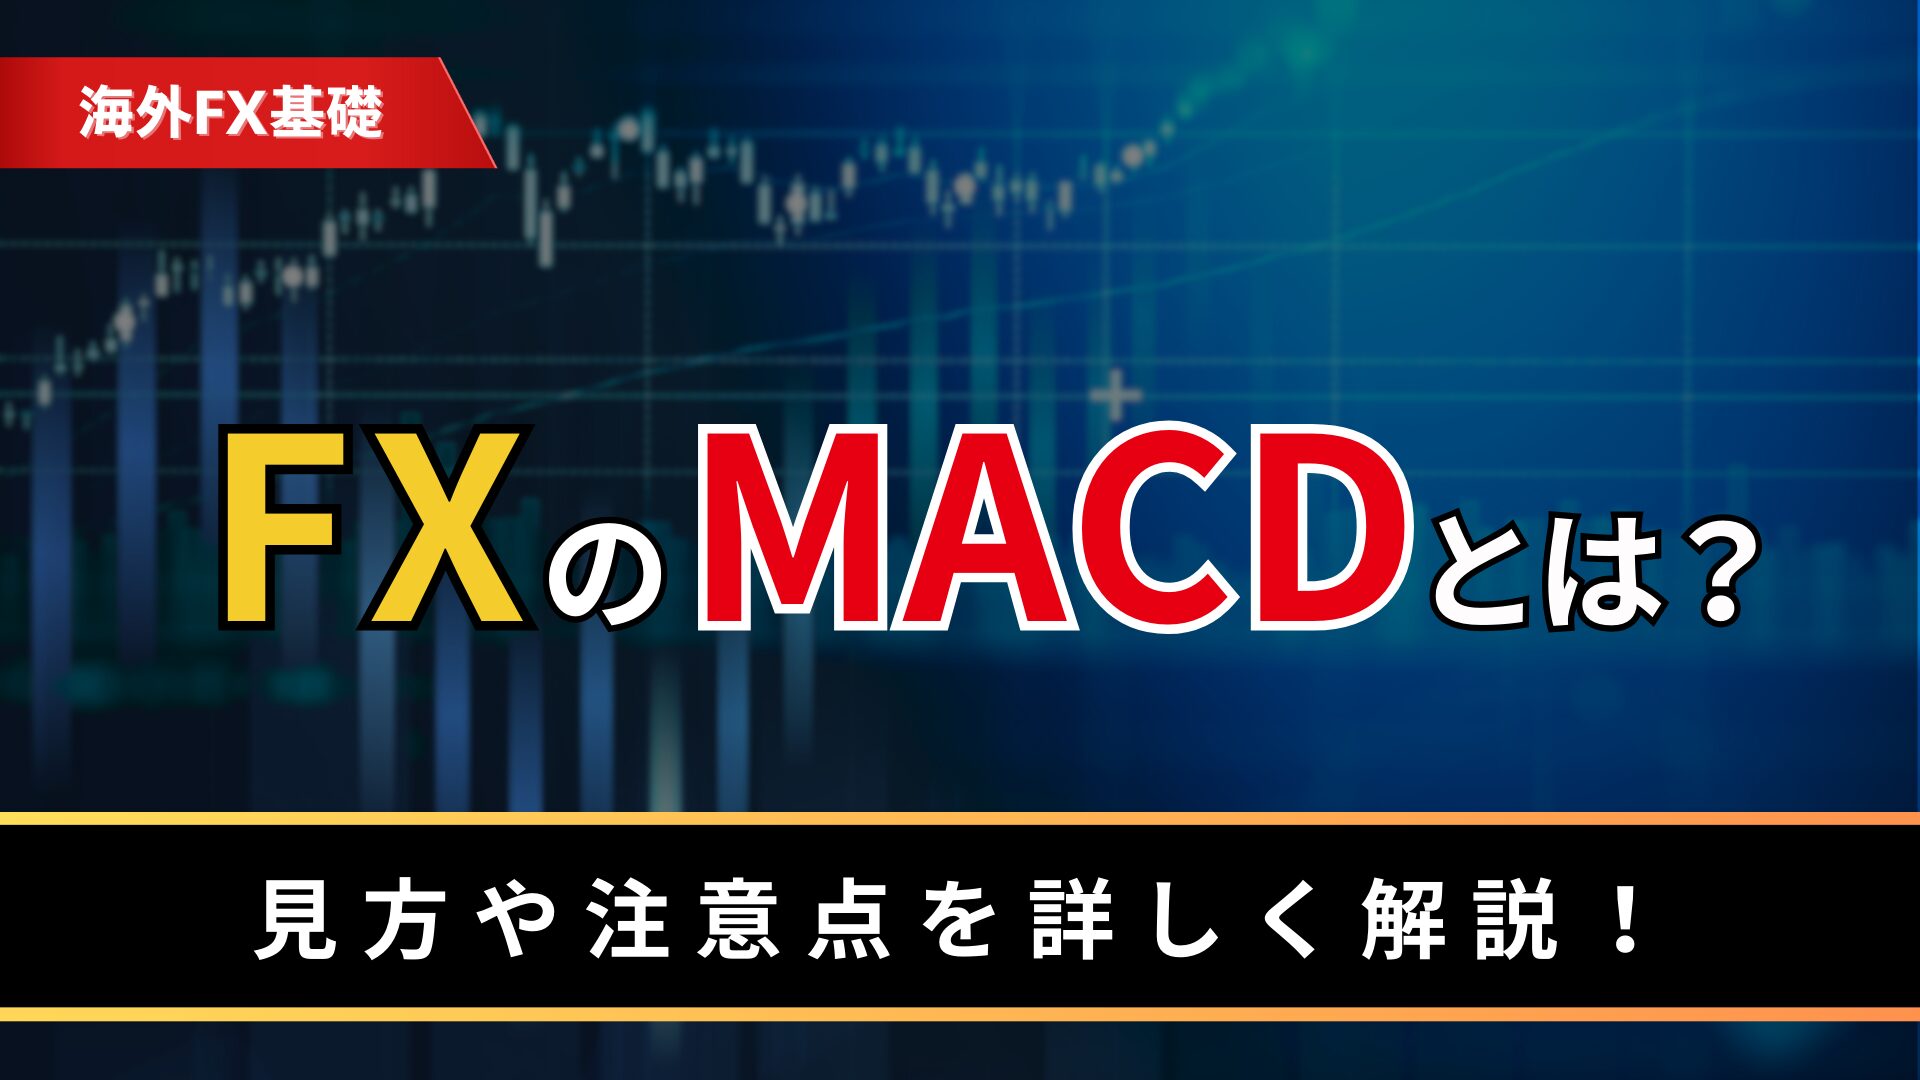 FXのMACDとは？